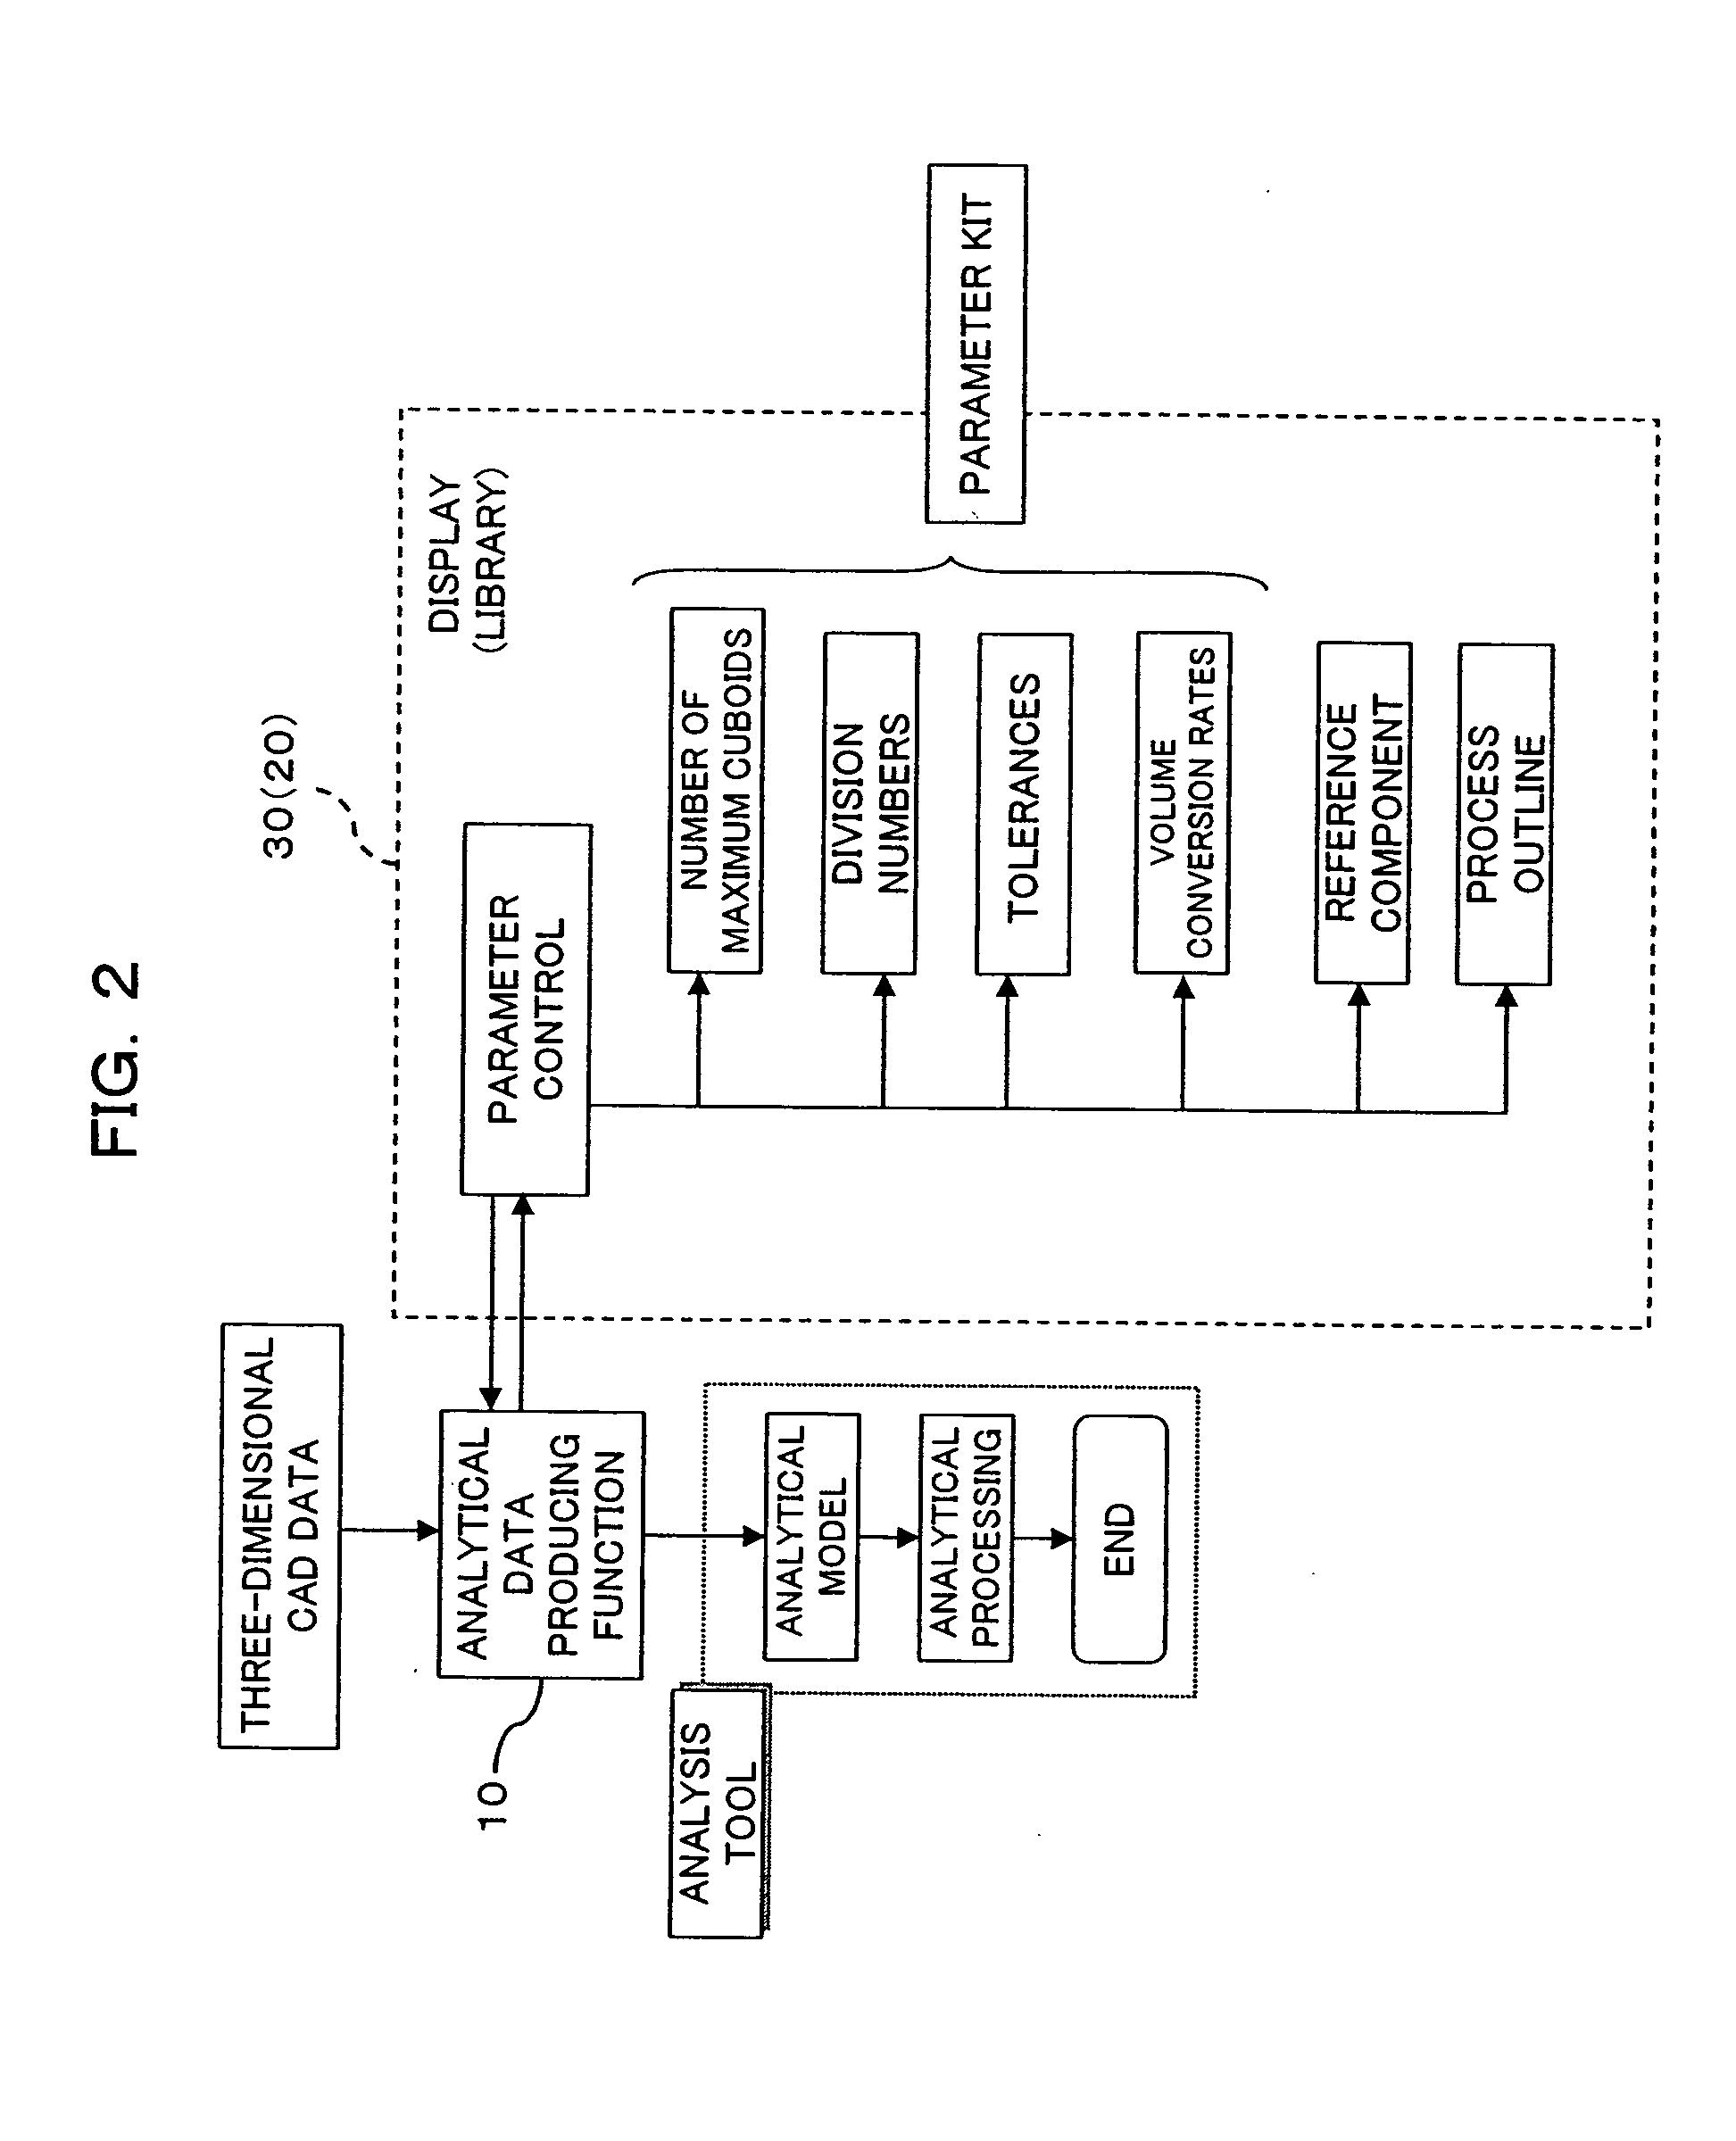 Mesh dividing device, computer-readable recording medium in which mesh dividing program is recoded, and method for setting maximum number of cuboids and parameters for mesh-division